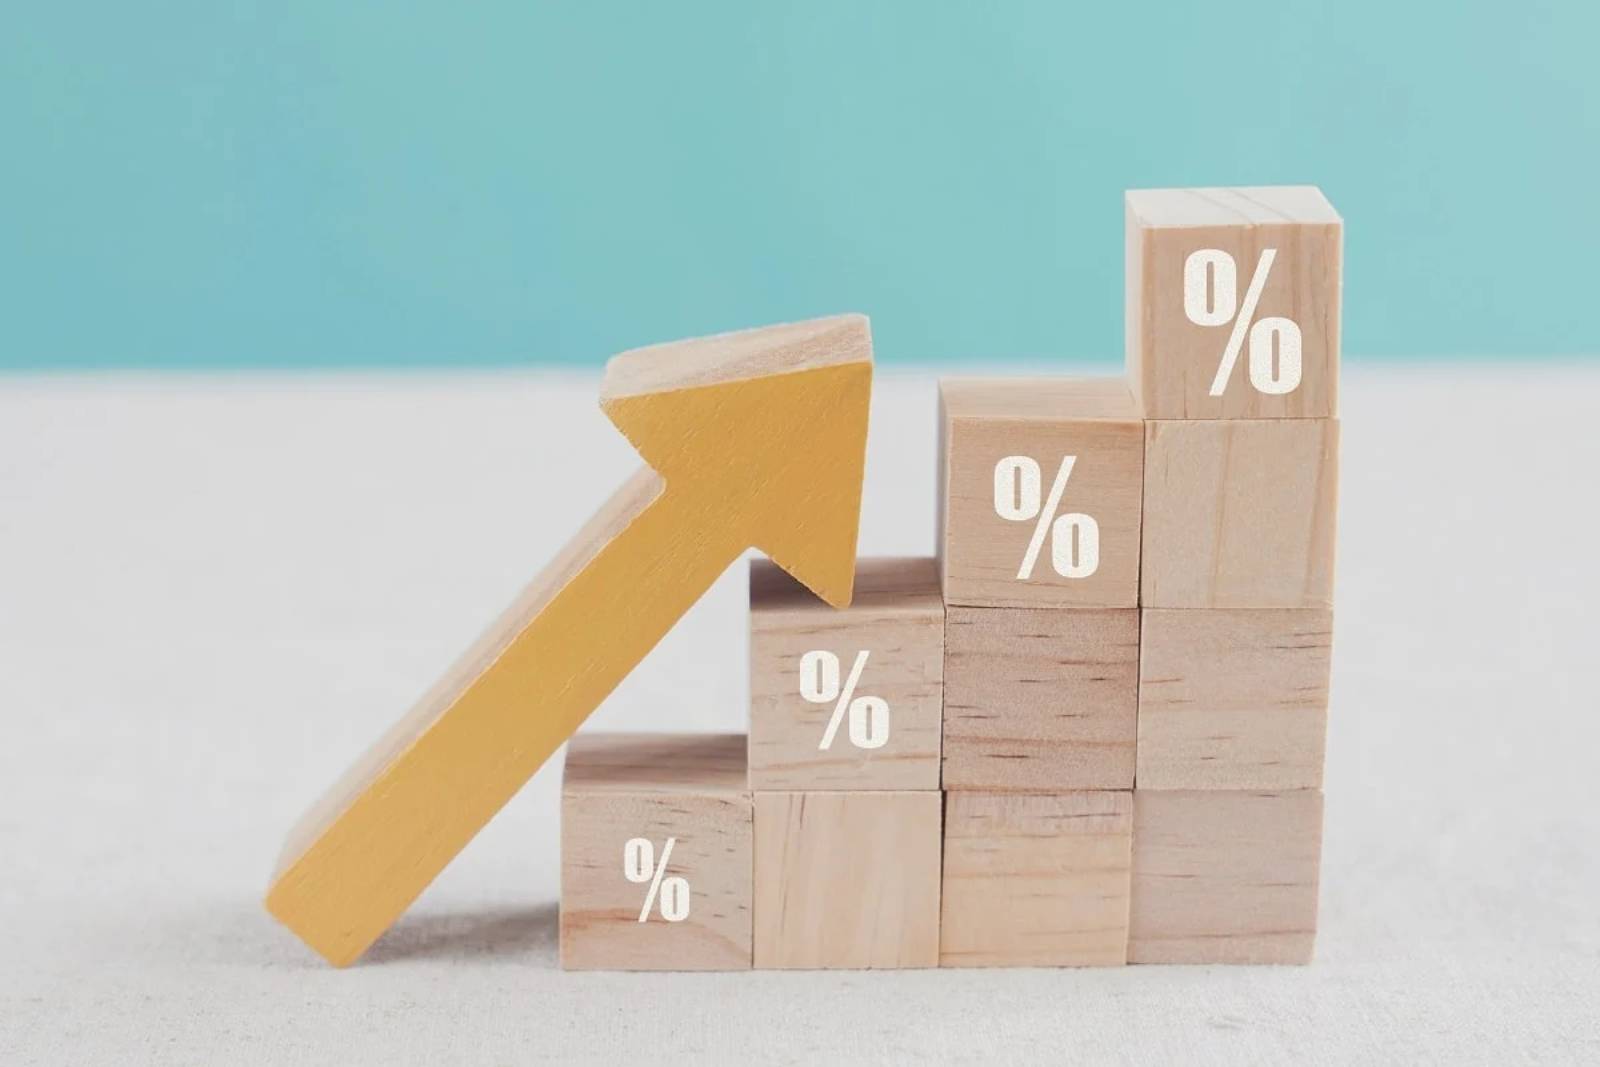 <p><span>Bankrates survey of large lenders showed that the average 30-year fixed rate was set at 3.68% in January 2020, compared to a 7.07% rate in March of this year. </span></p>